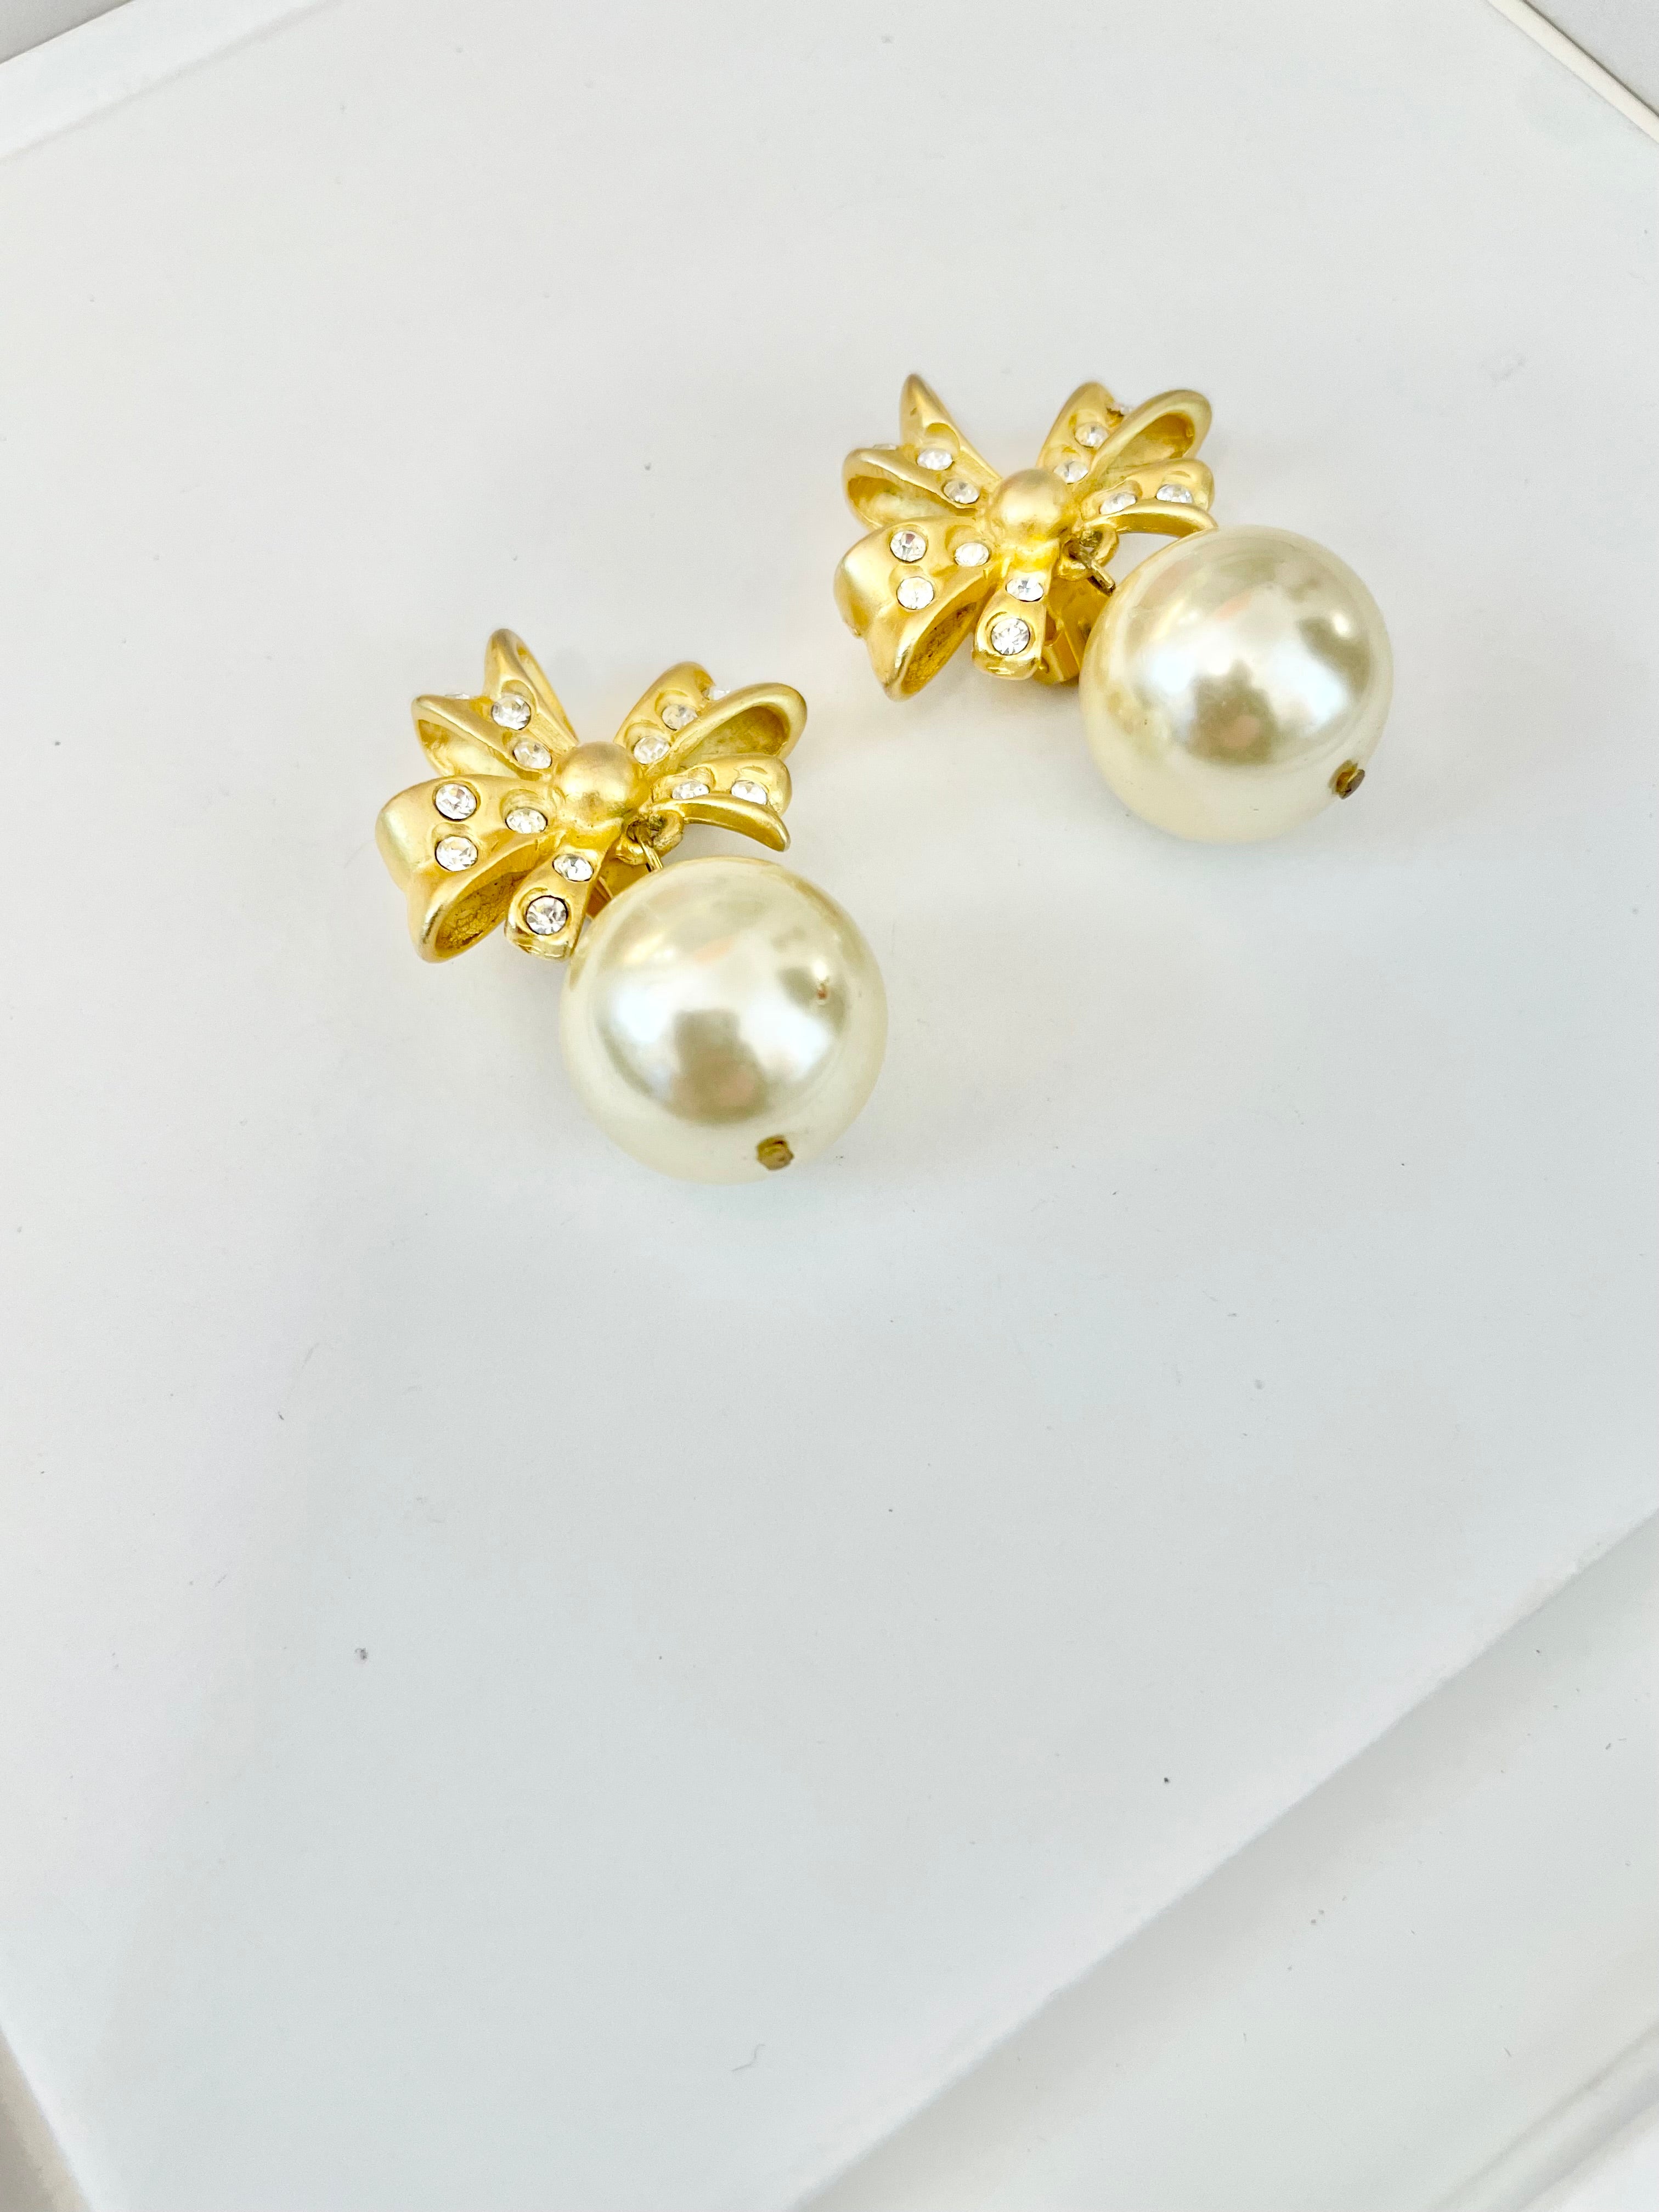 The charming gal loves only pearls! These drop earings are truly divine!!